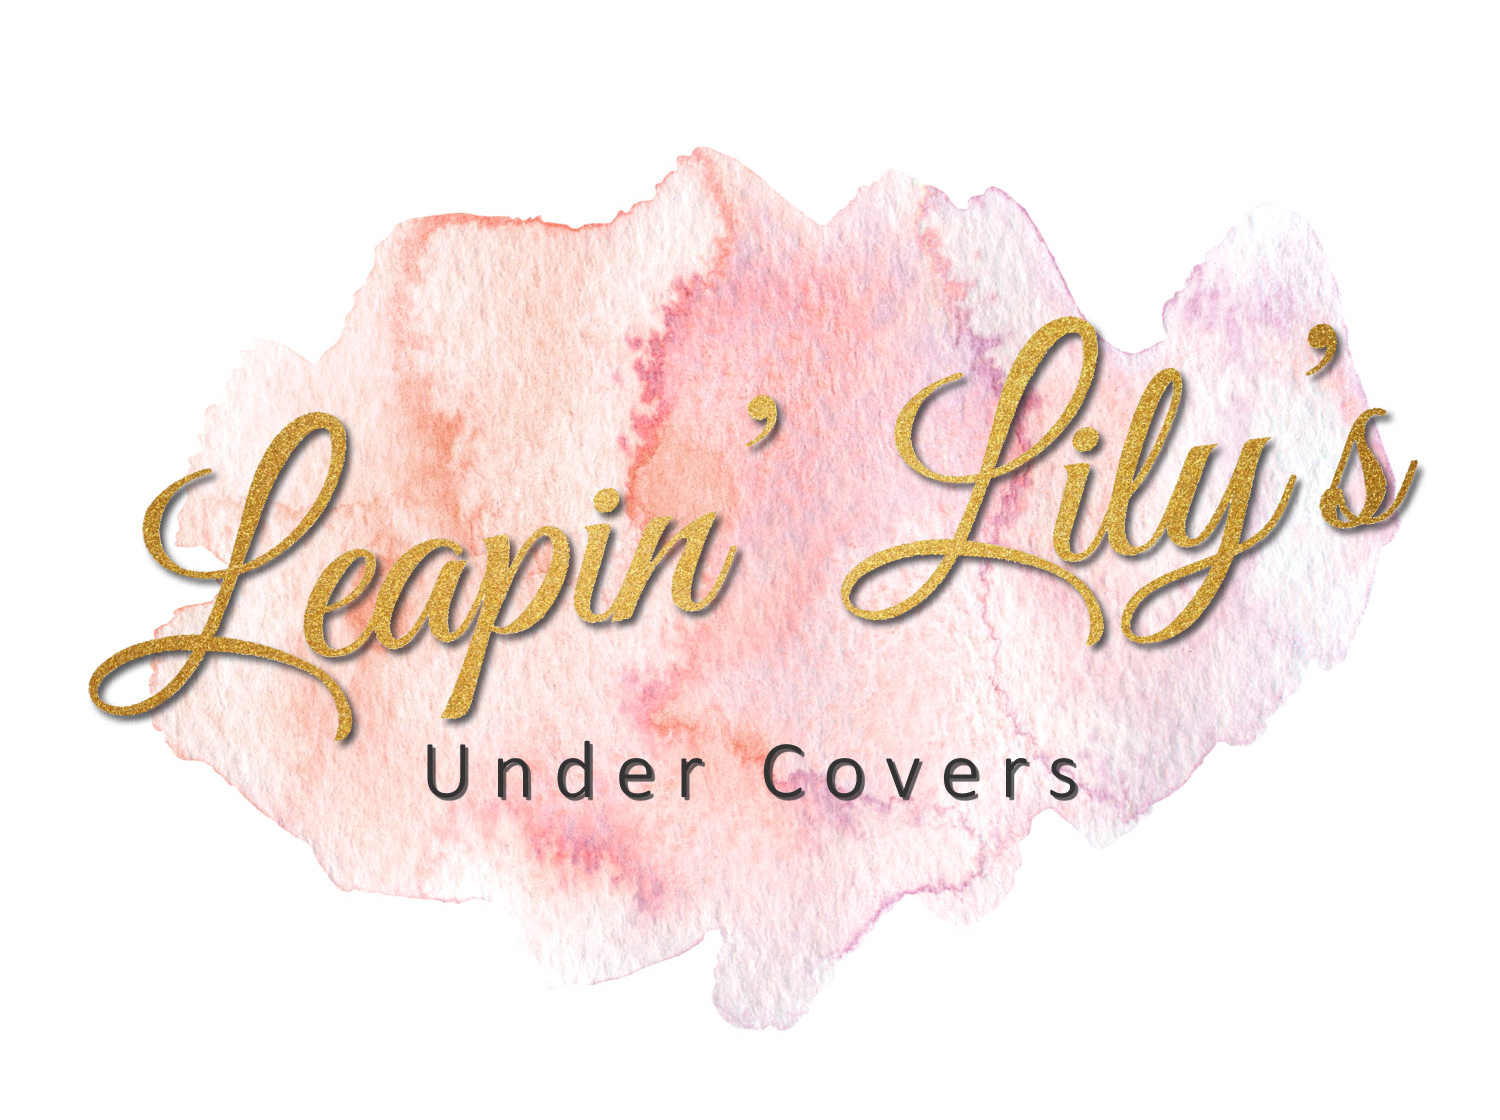 Leapin' Lily's Under Covers